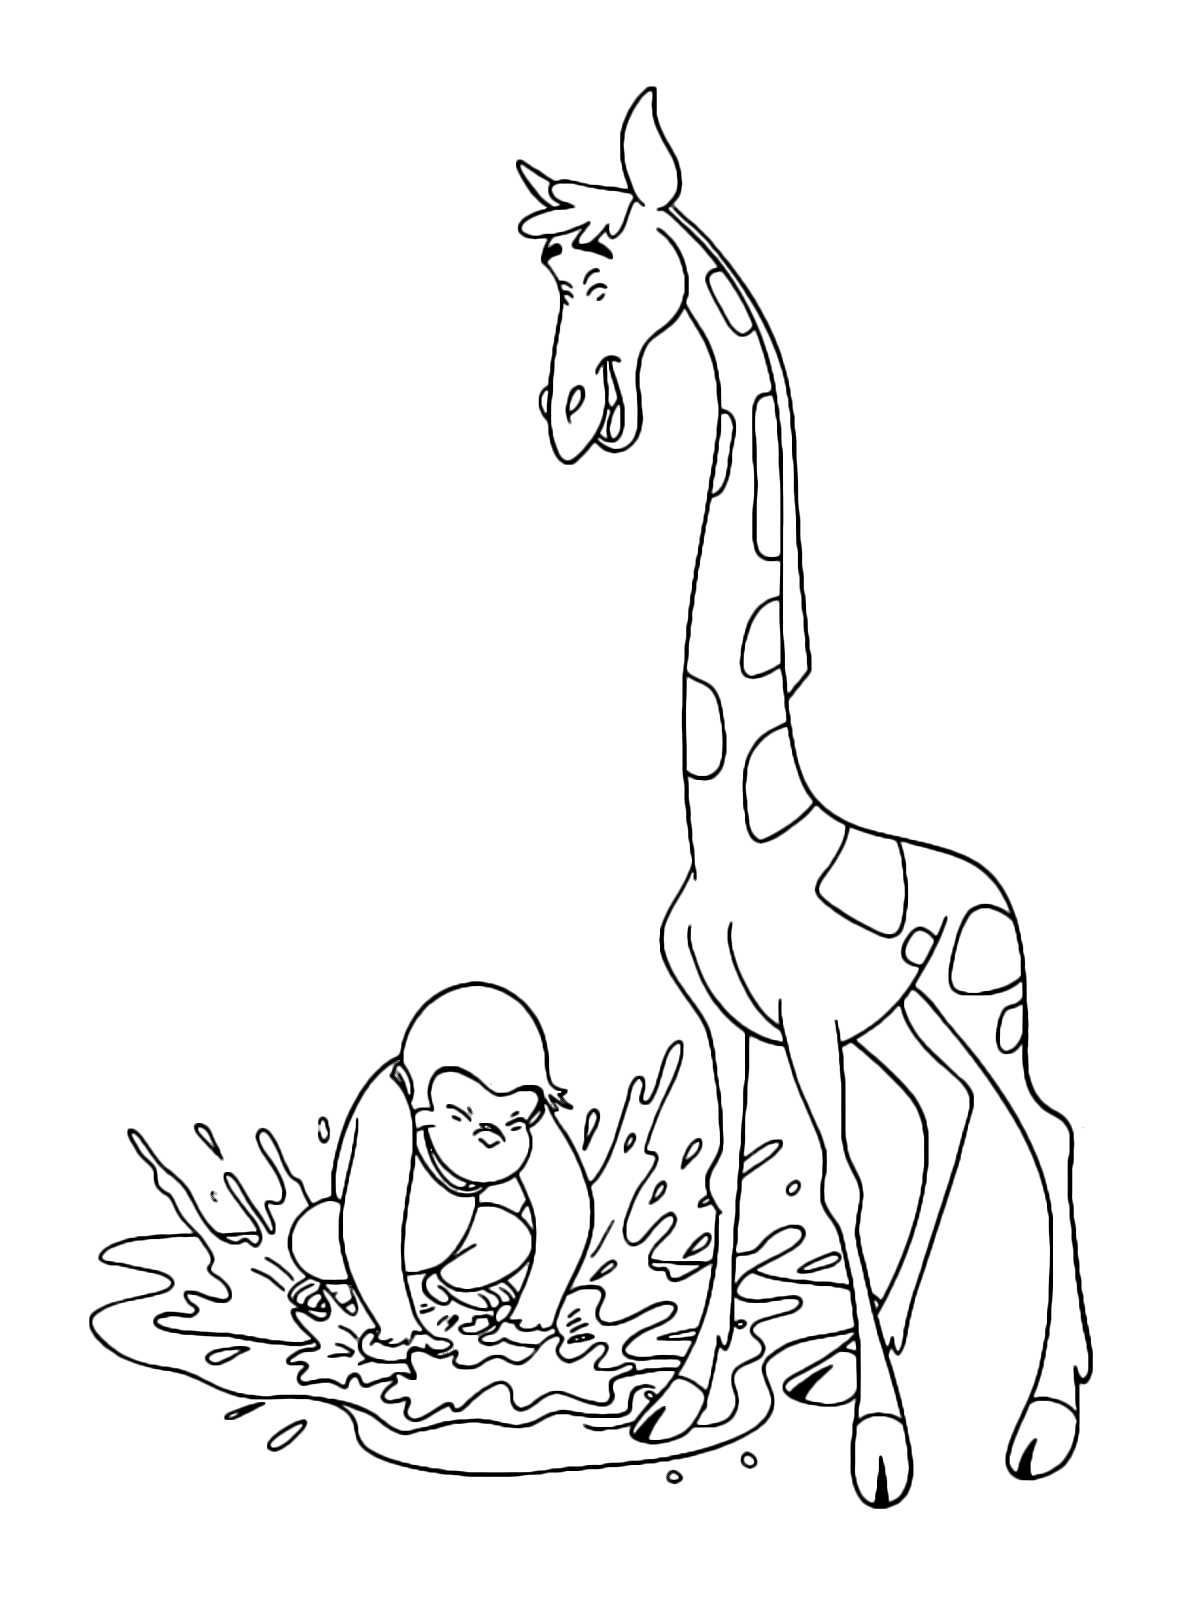 Curious George - George plays with water along with a giraffe